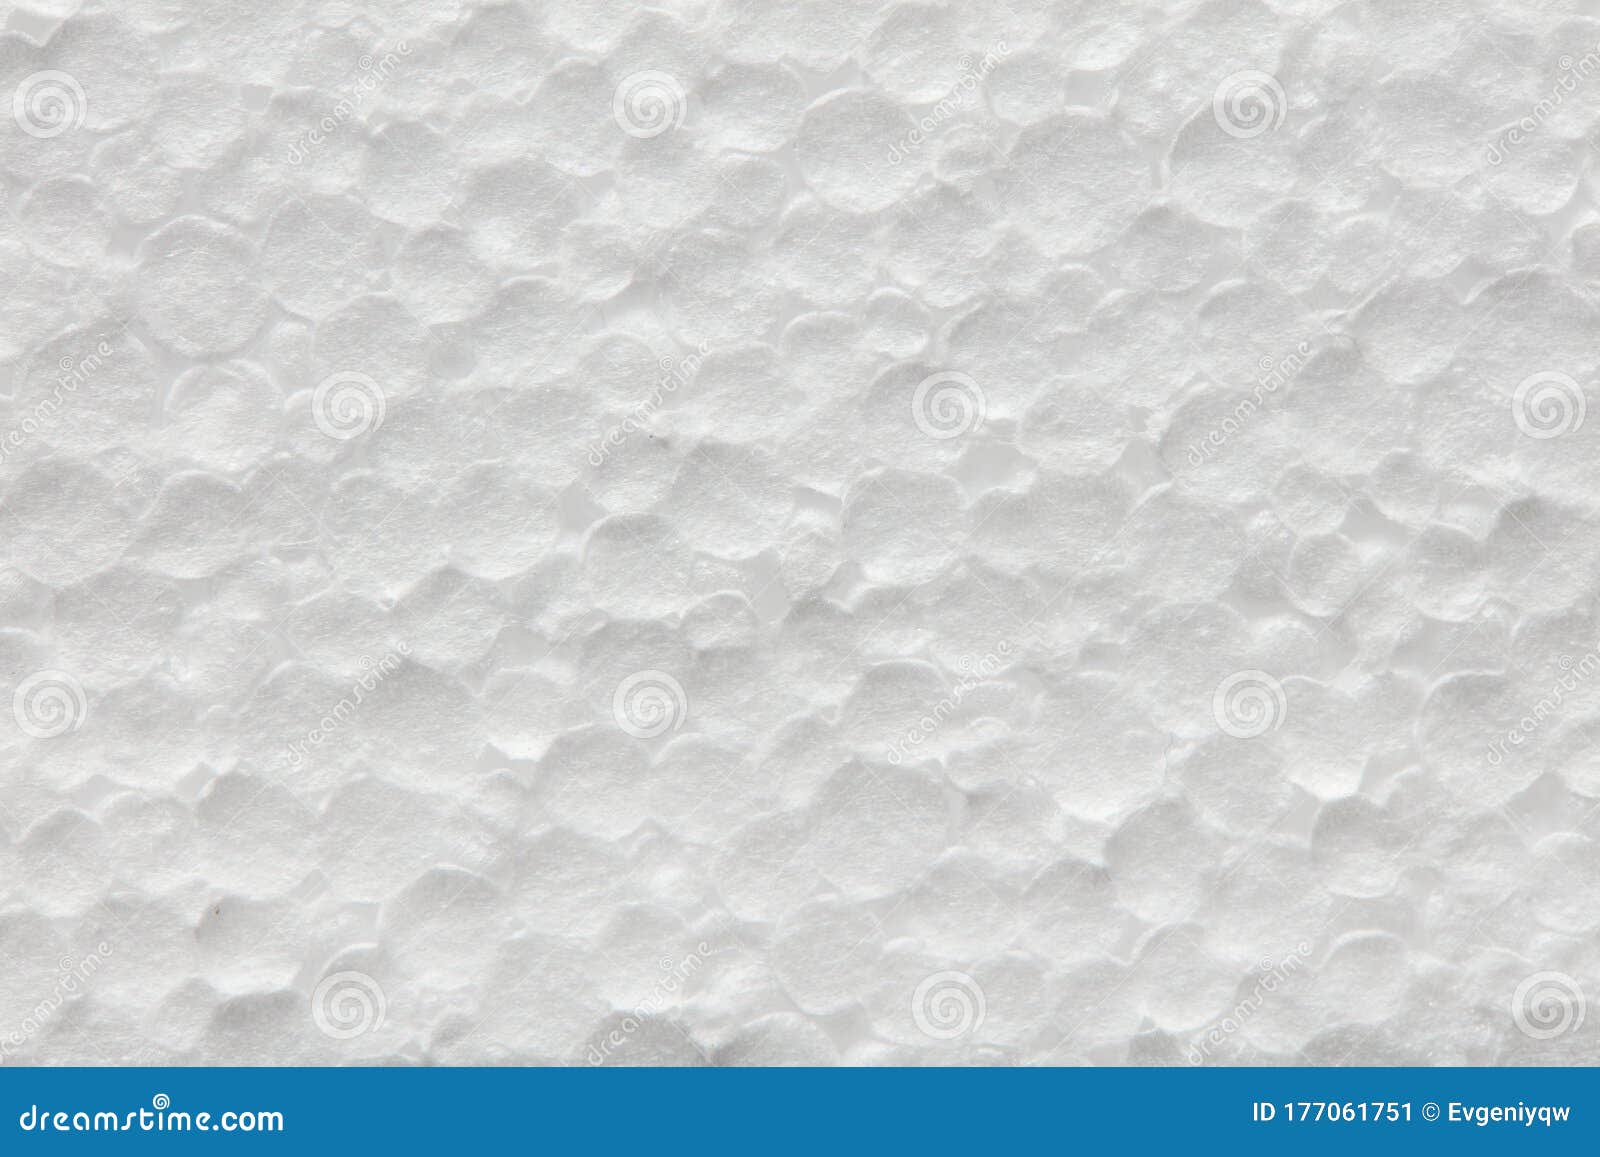 polystyrene, styrofoam foam texture. universal packaging material. insulation and noise insulation